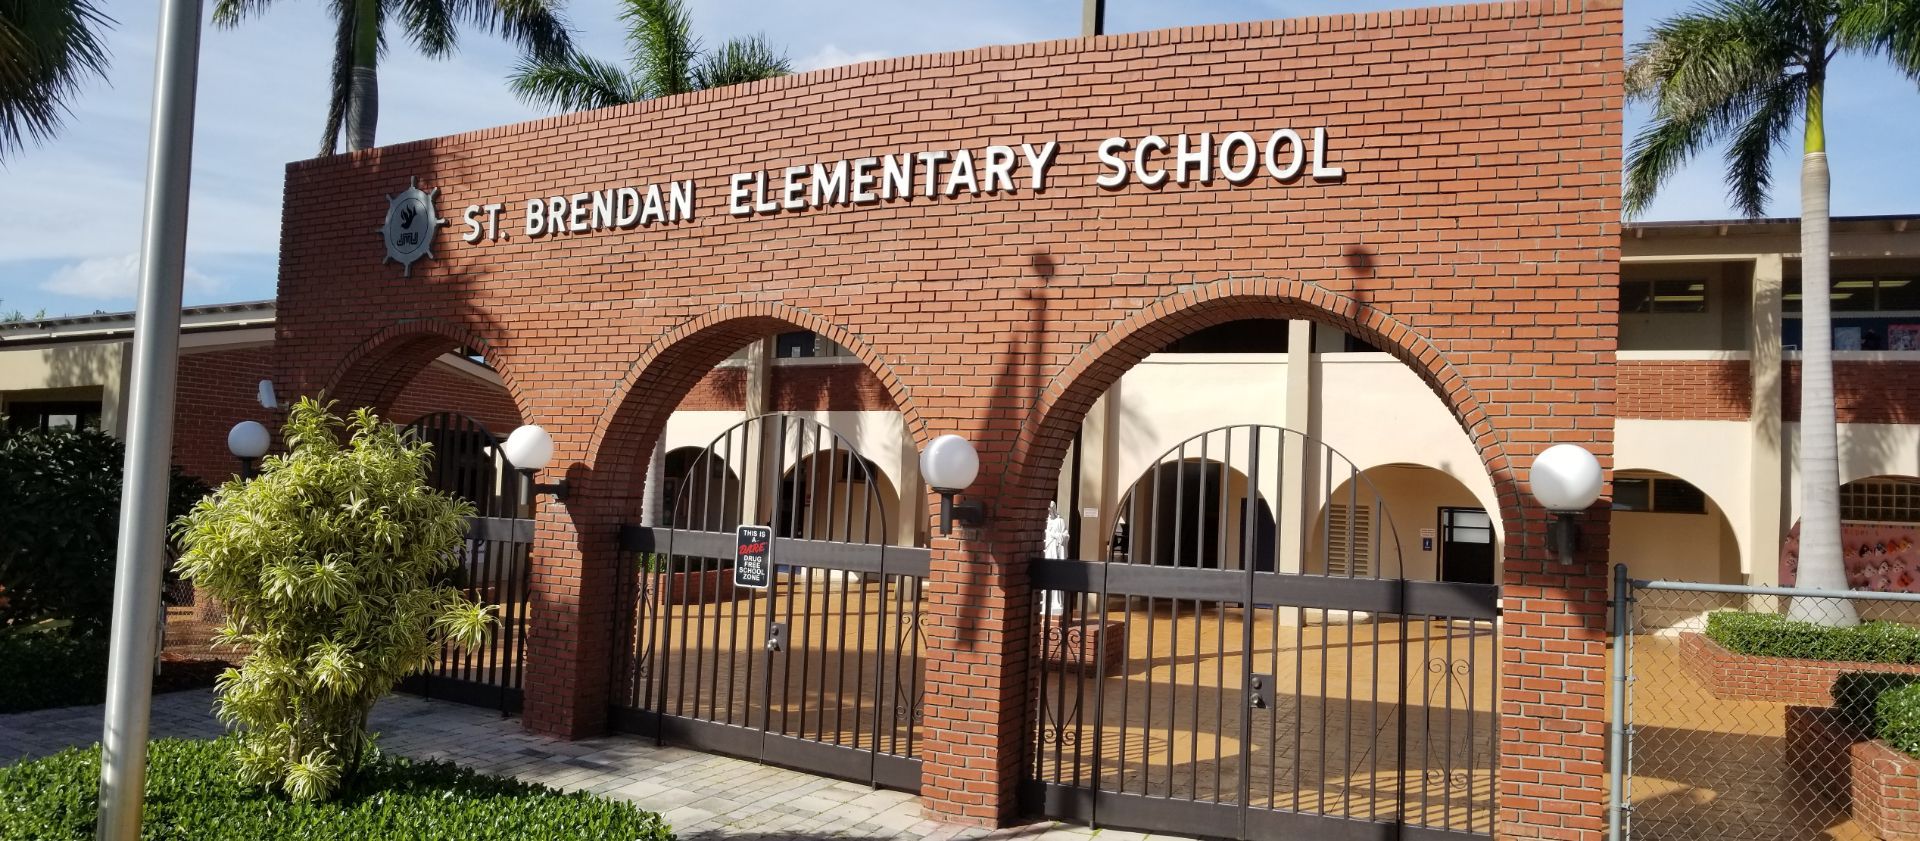 A brick sign for st. efredin elementary school